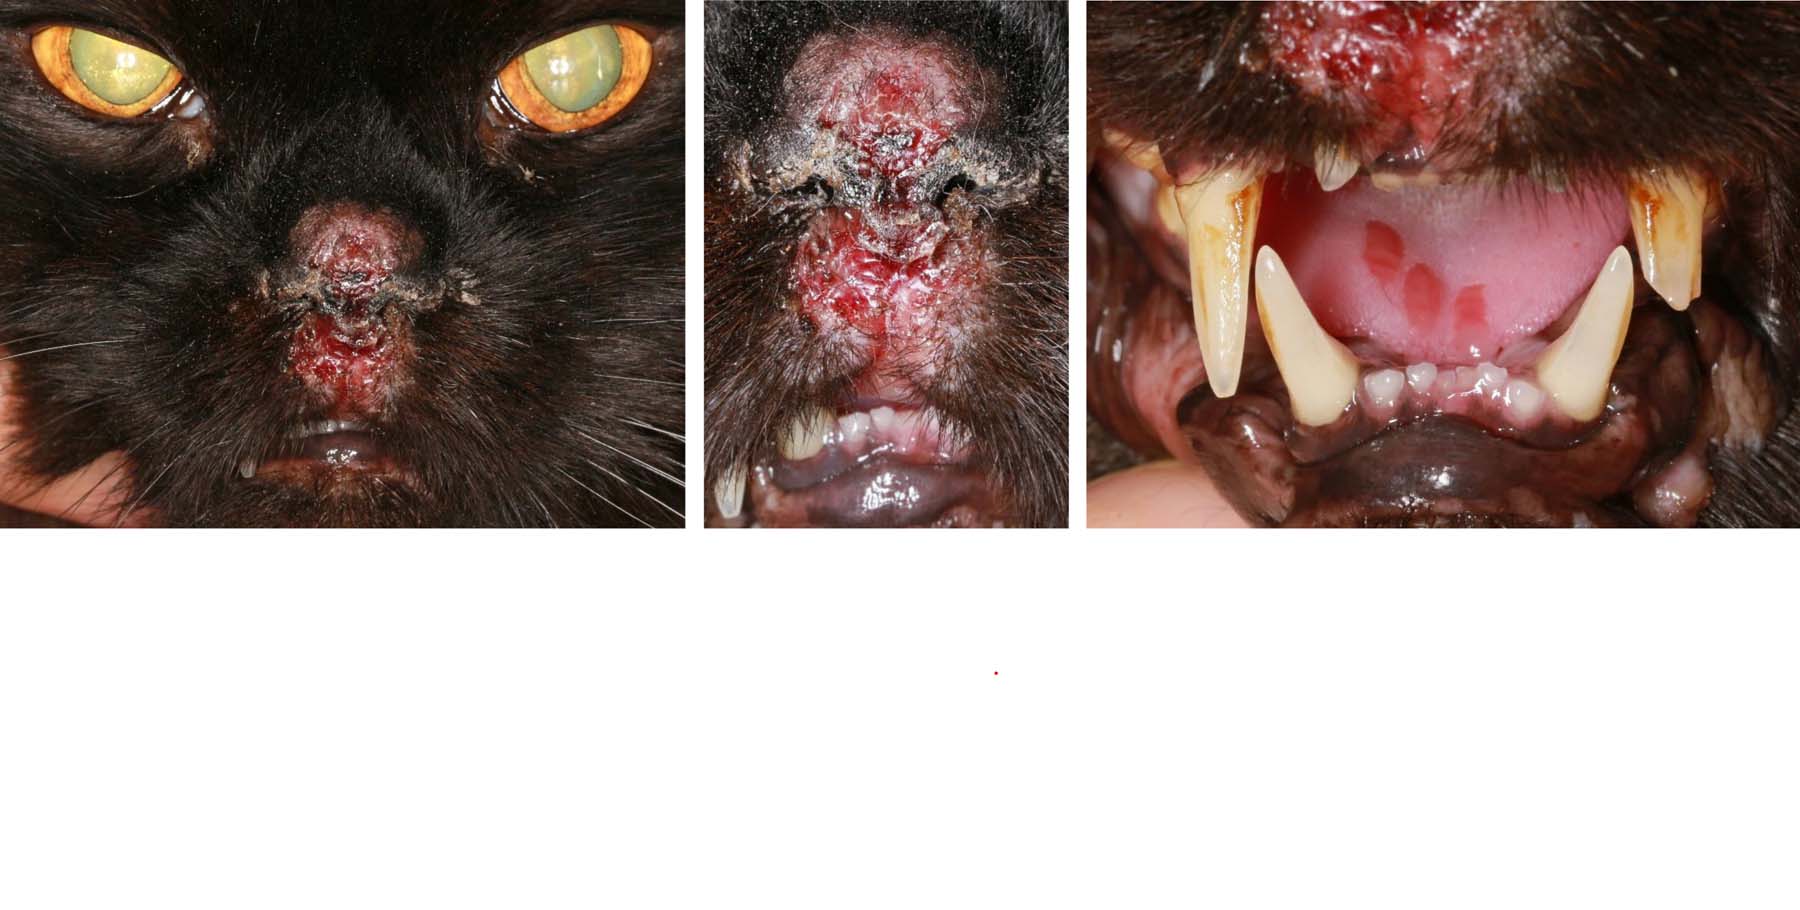 Calici Virus Infection: Rapid Onset Facial & Oral Ulceration, Persian Cat